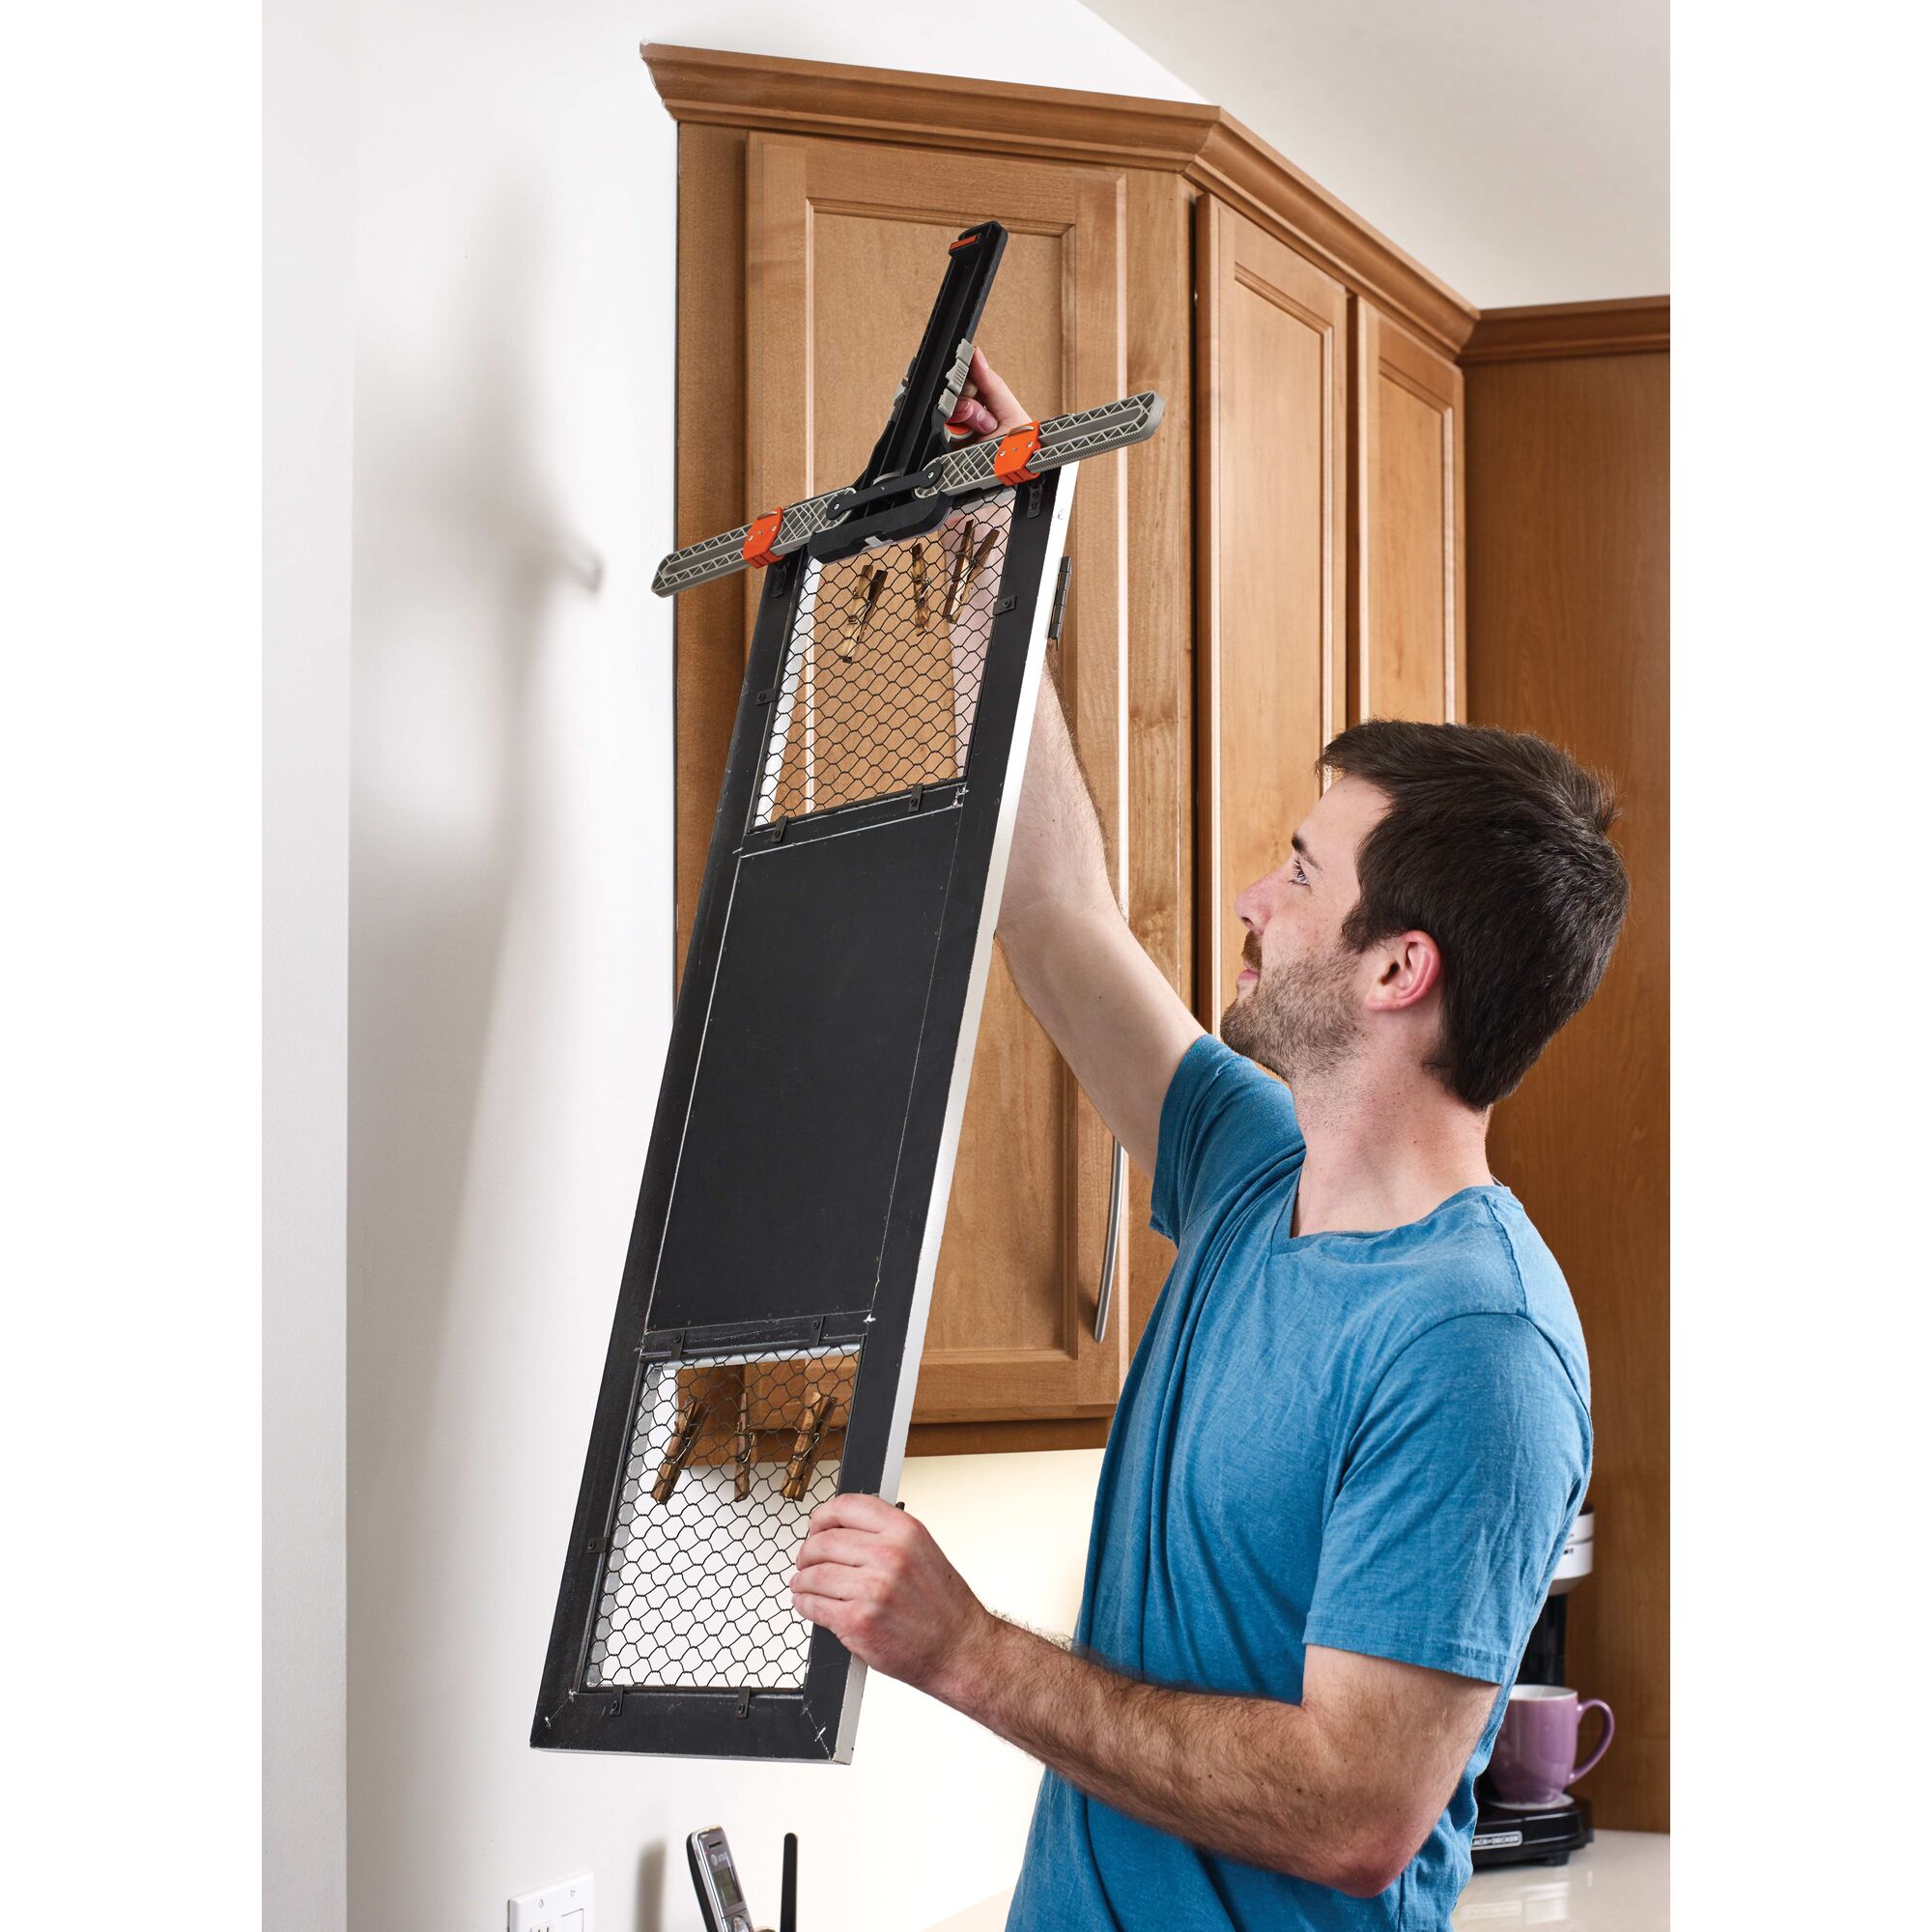 MarkIT picture hanging tool being used by a person to visualize placement of the frame.